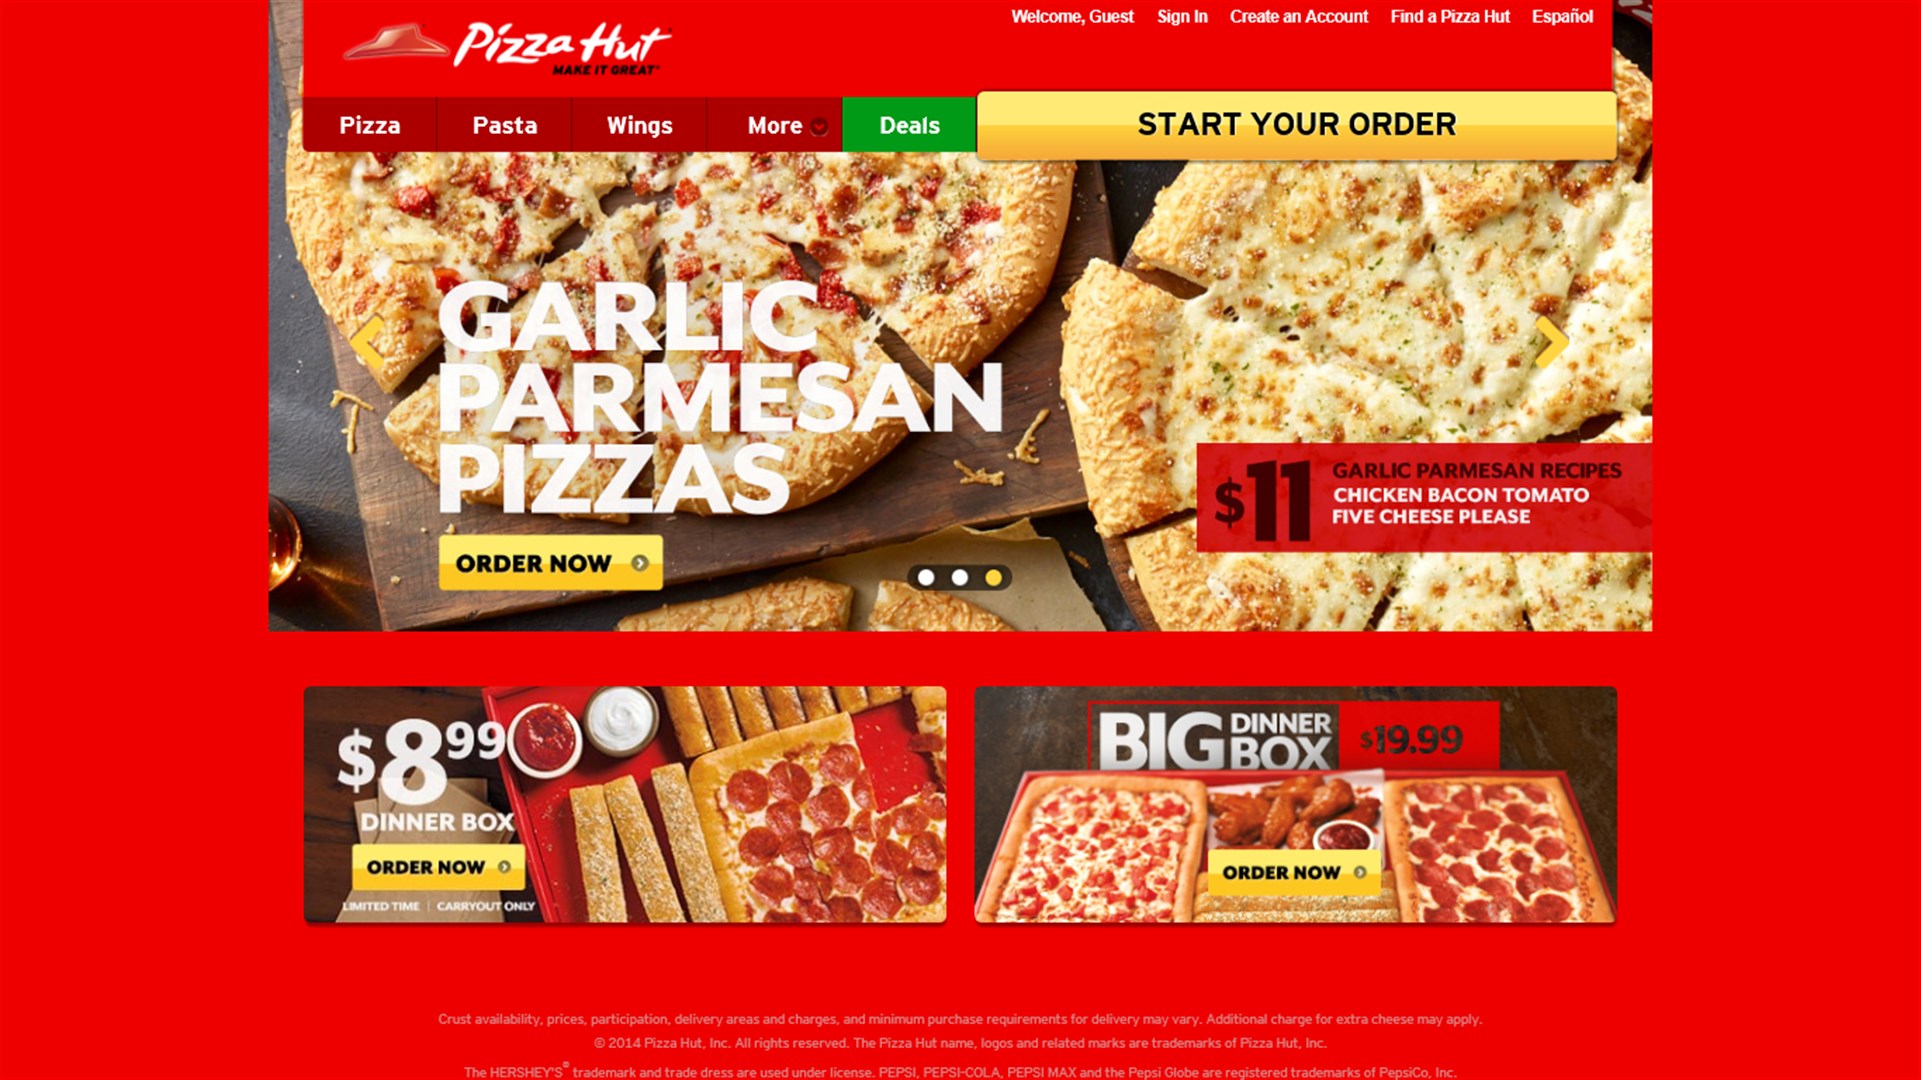 Pizza Hut Brings Back The Big Dinner Box For $19.99 Just In Time